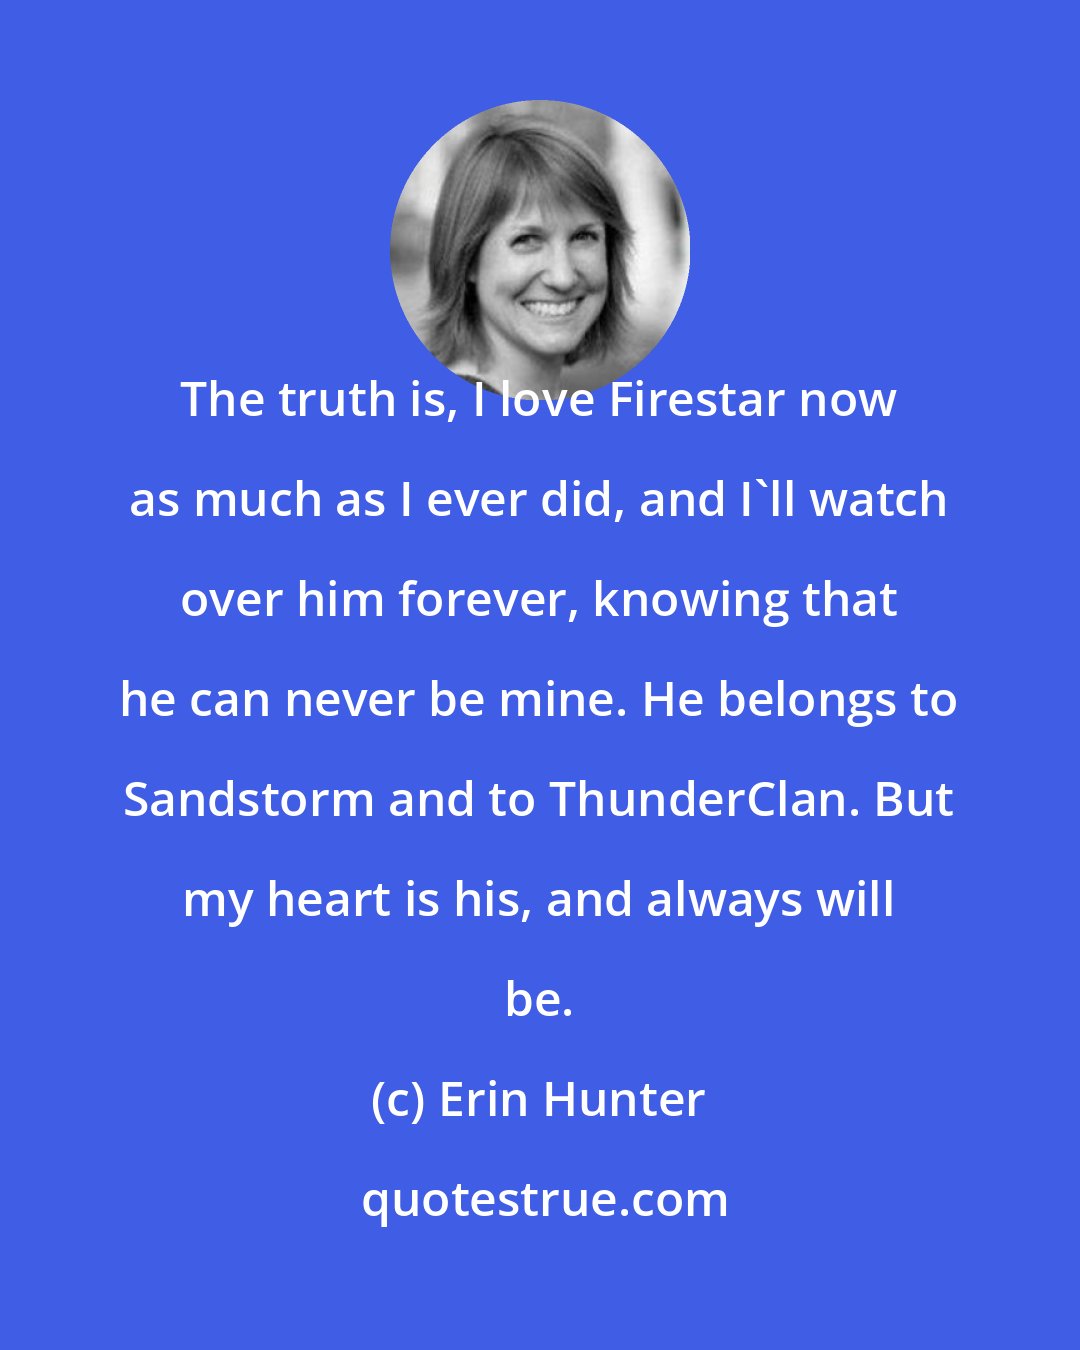 Erin Hunter: The truth is, I love Firestar now as much as I ever did, and I'll watch over him forever, knowing that he can never be mine. He belongs to Sandstorm and to ThunderClan. But my heart is his, and always will be.